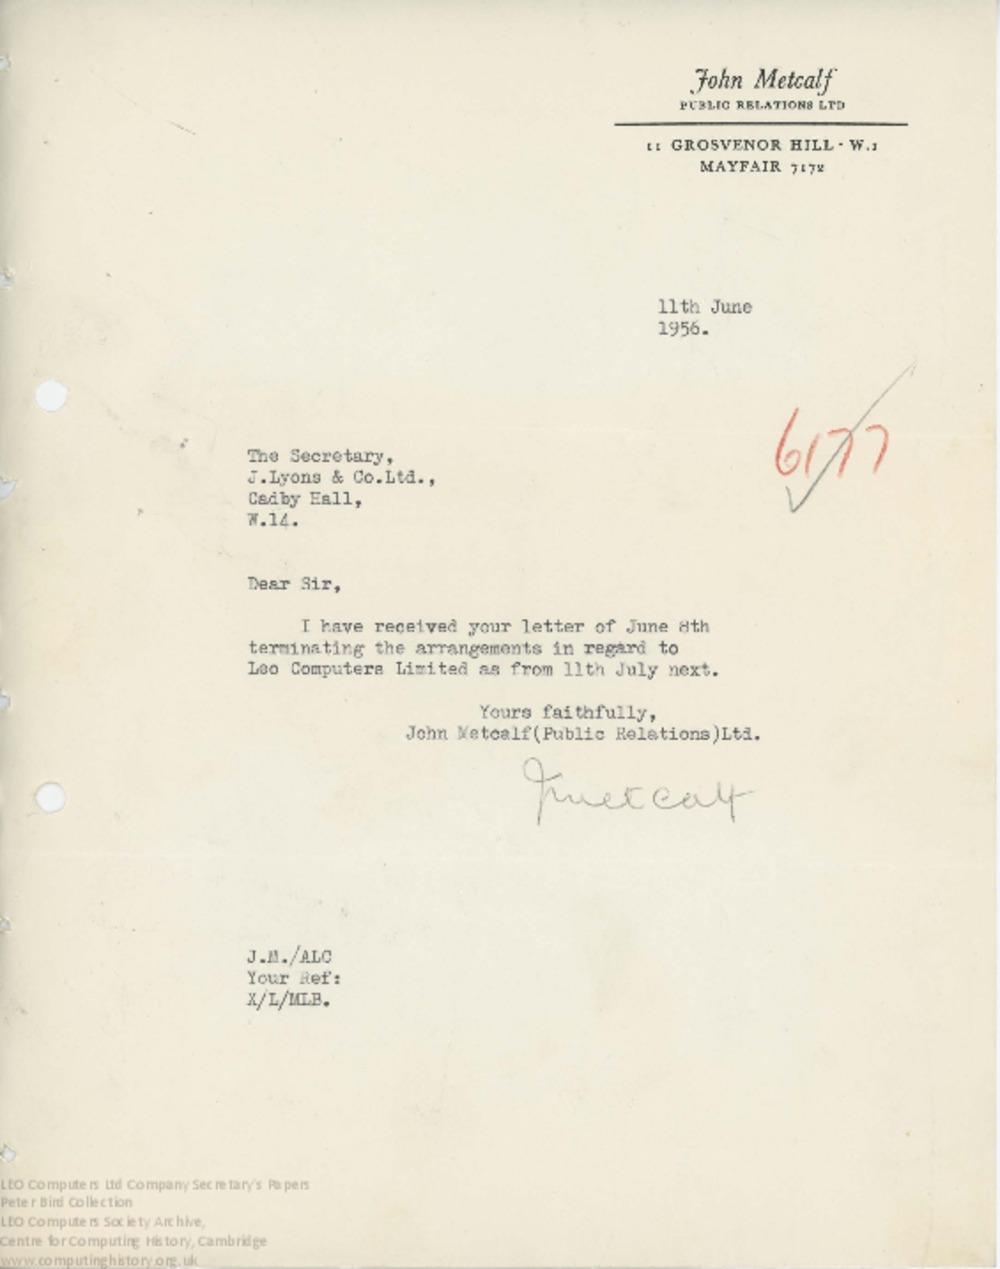 Article: 62447  Termination of Public Relations services, 11 June 1956